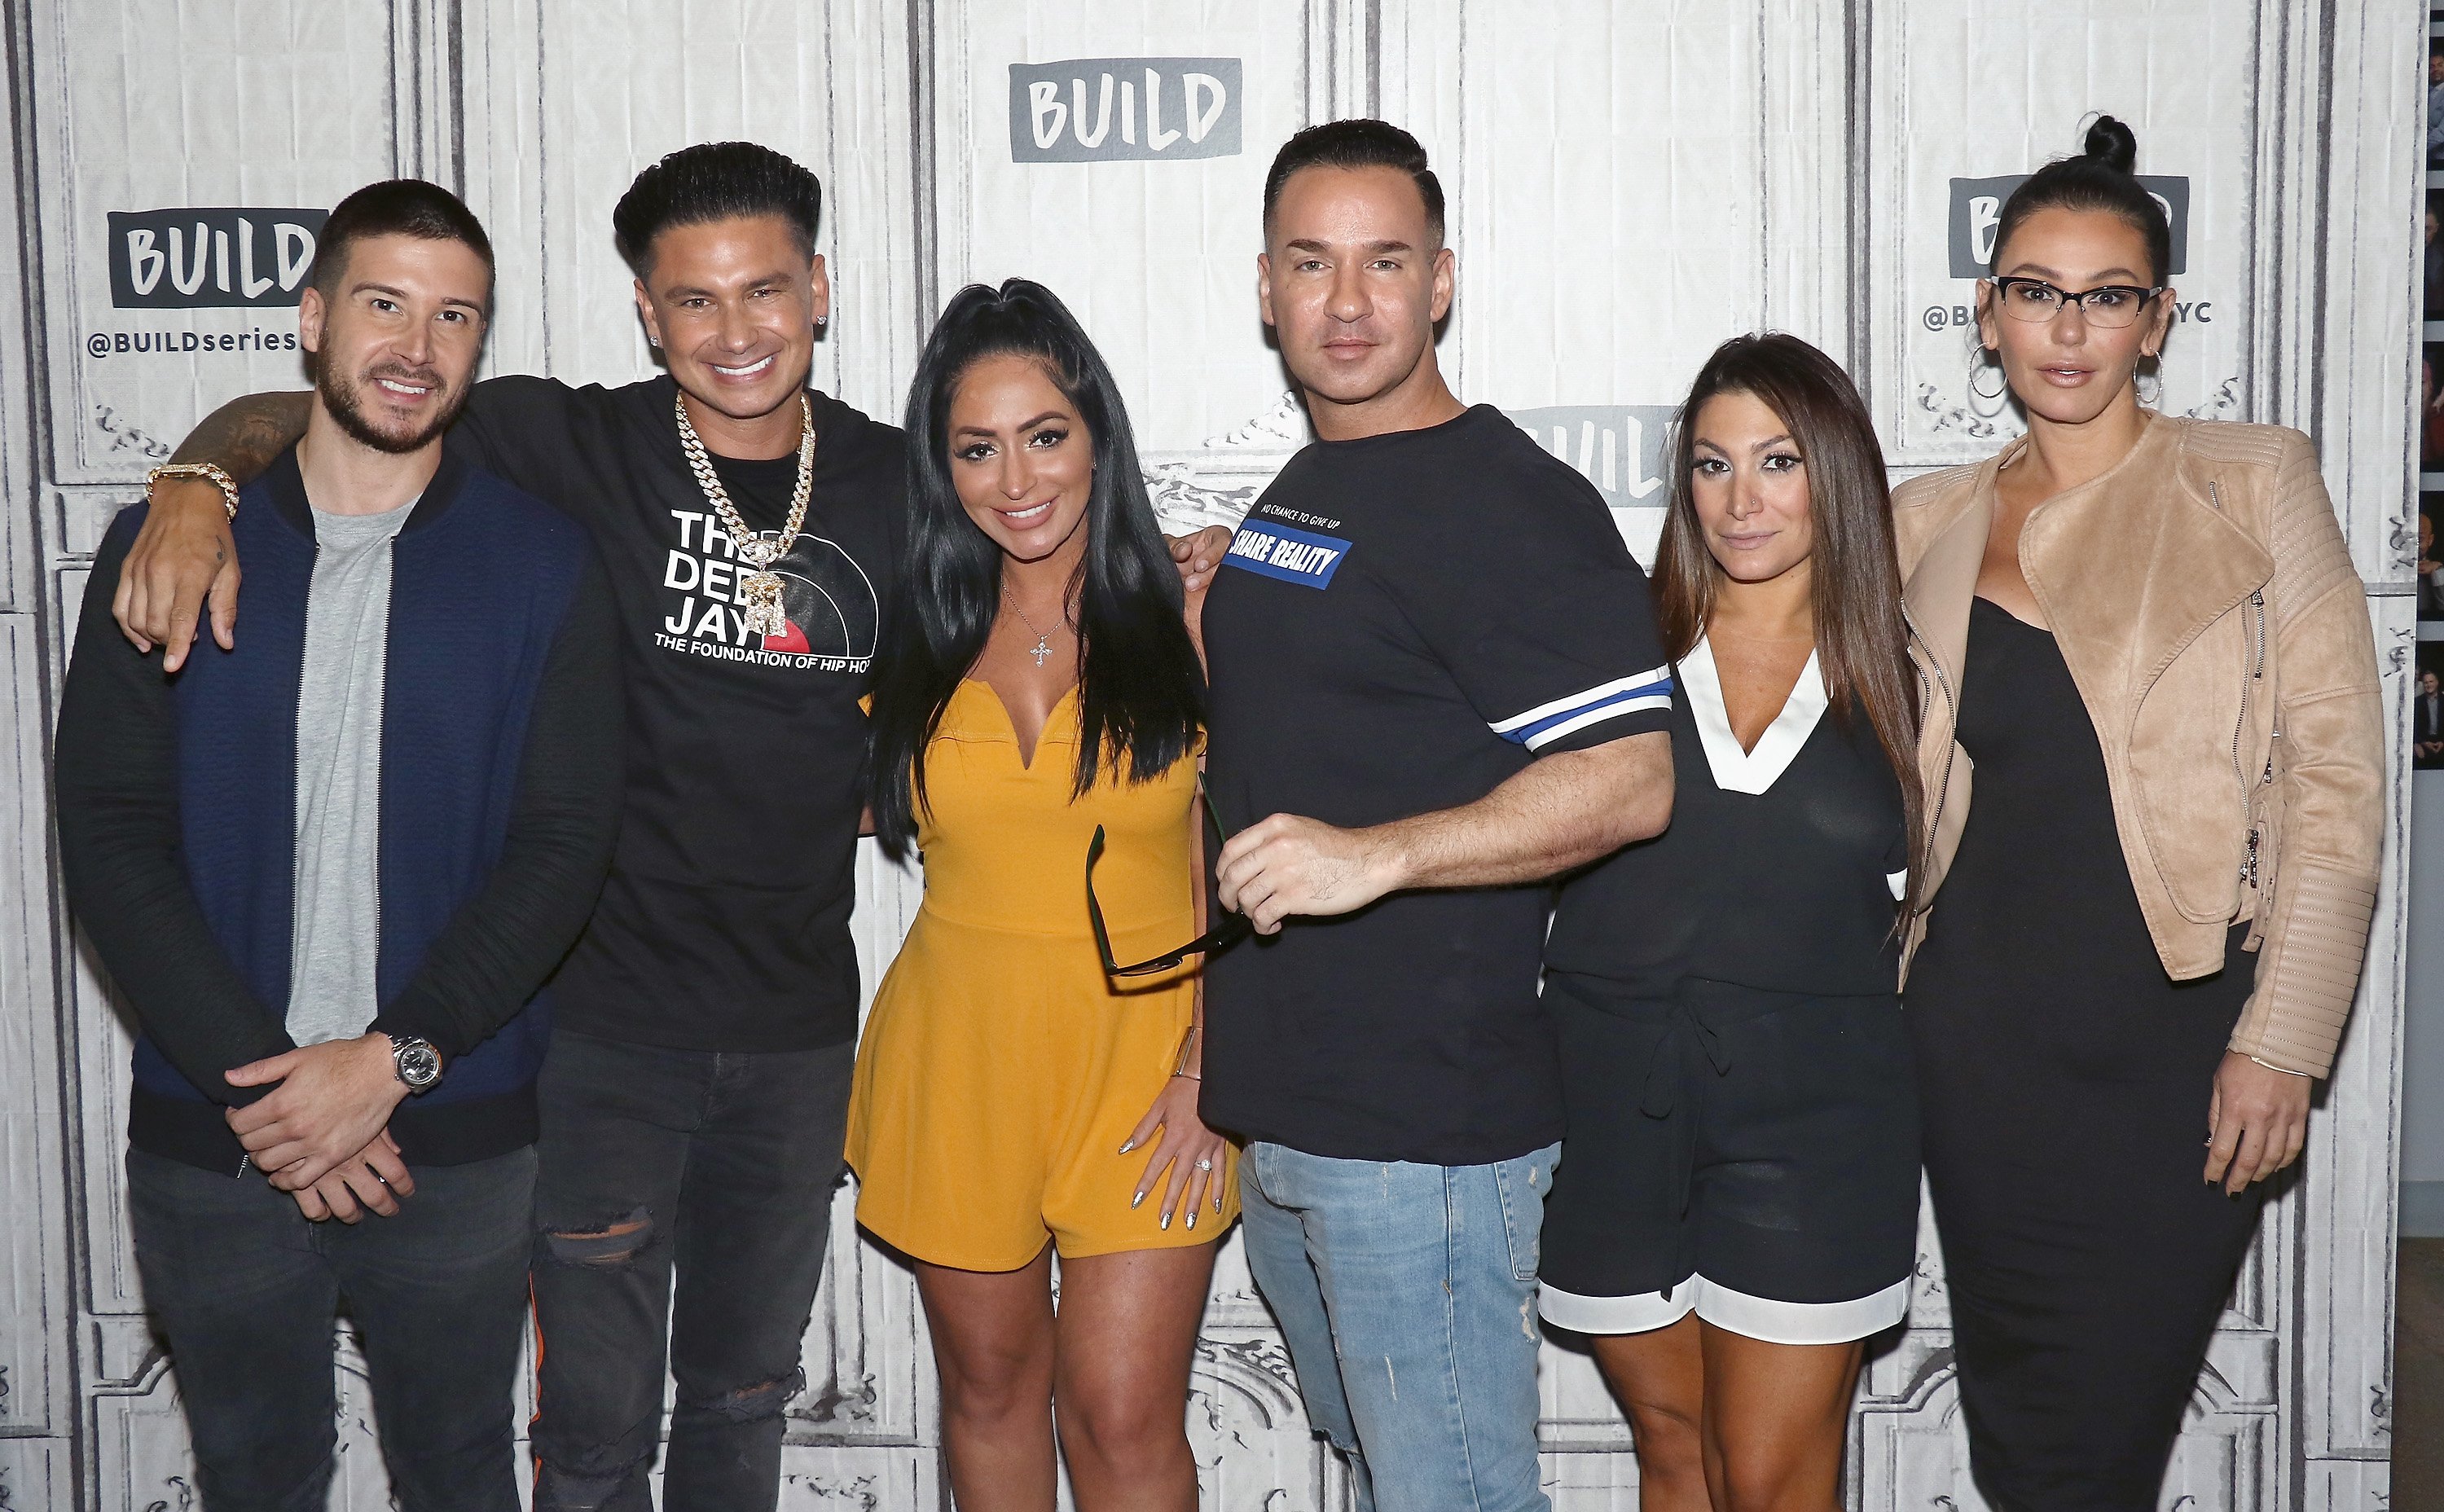 Cast of 'Jersey Shore: Family Vacation' from L to R: Vinny Guadagnino, Pauly DelVecchio, Angelina Larangeira, Mike 'The Situation' Sorrentino, Deena Cortese, and Jenni 'JWoww' Farley